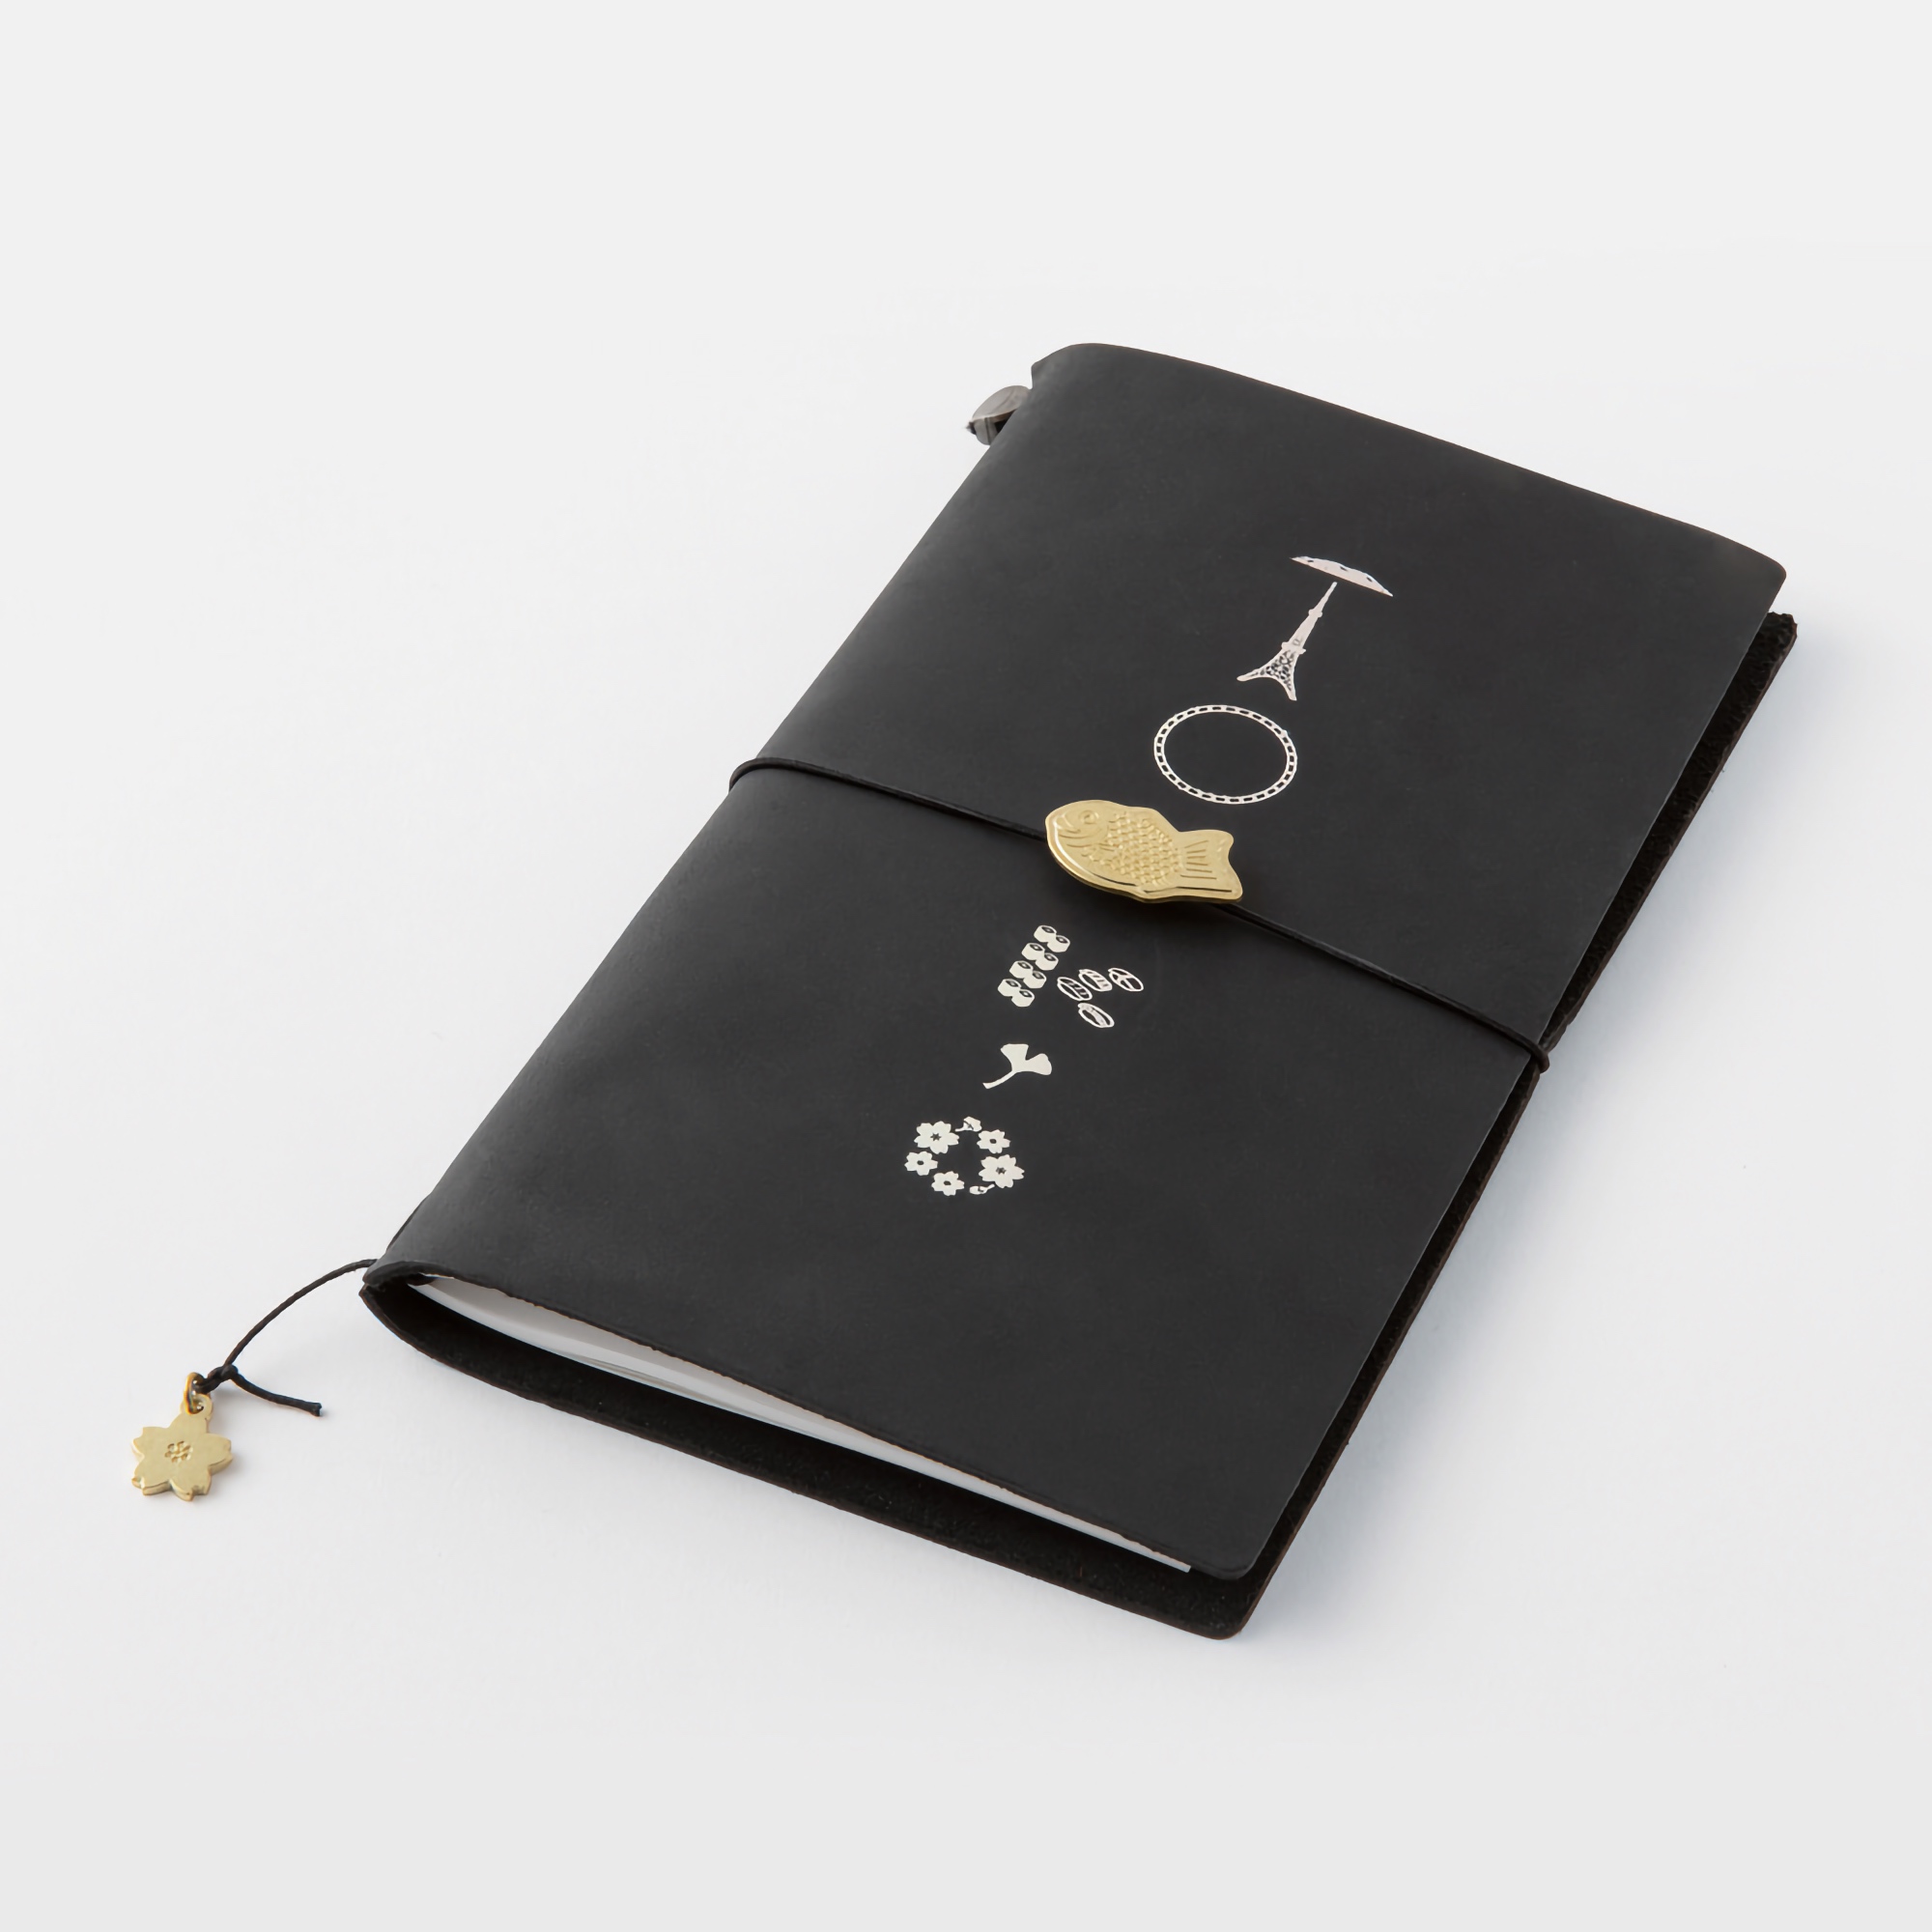 Traveler’s Company Traveler's notebook - Tokyo Brass Charms Limited Edition